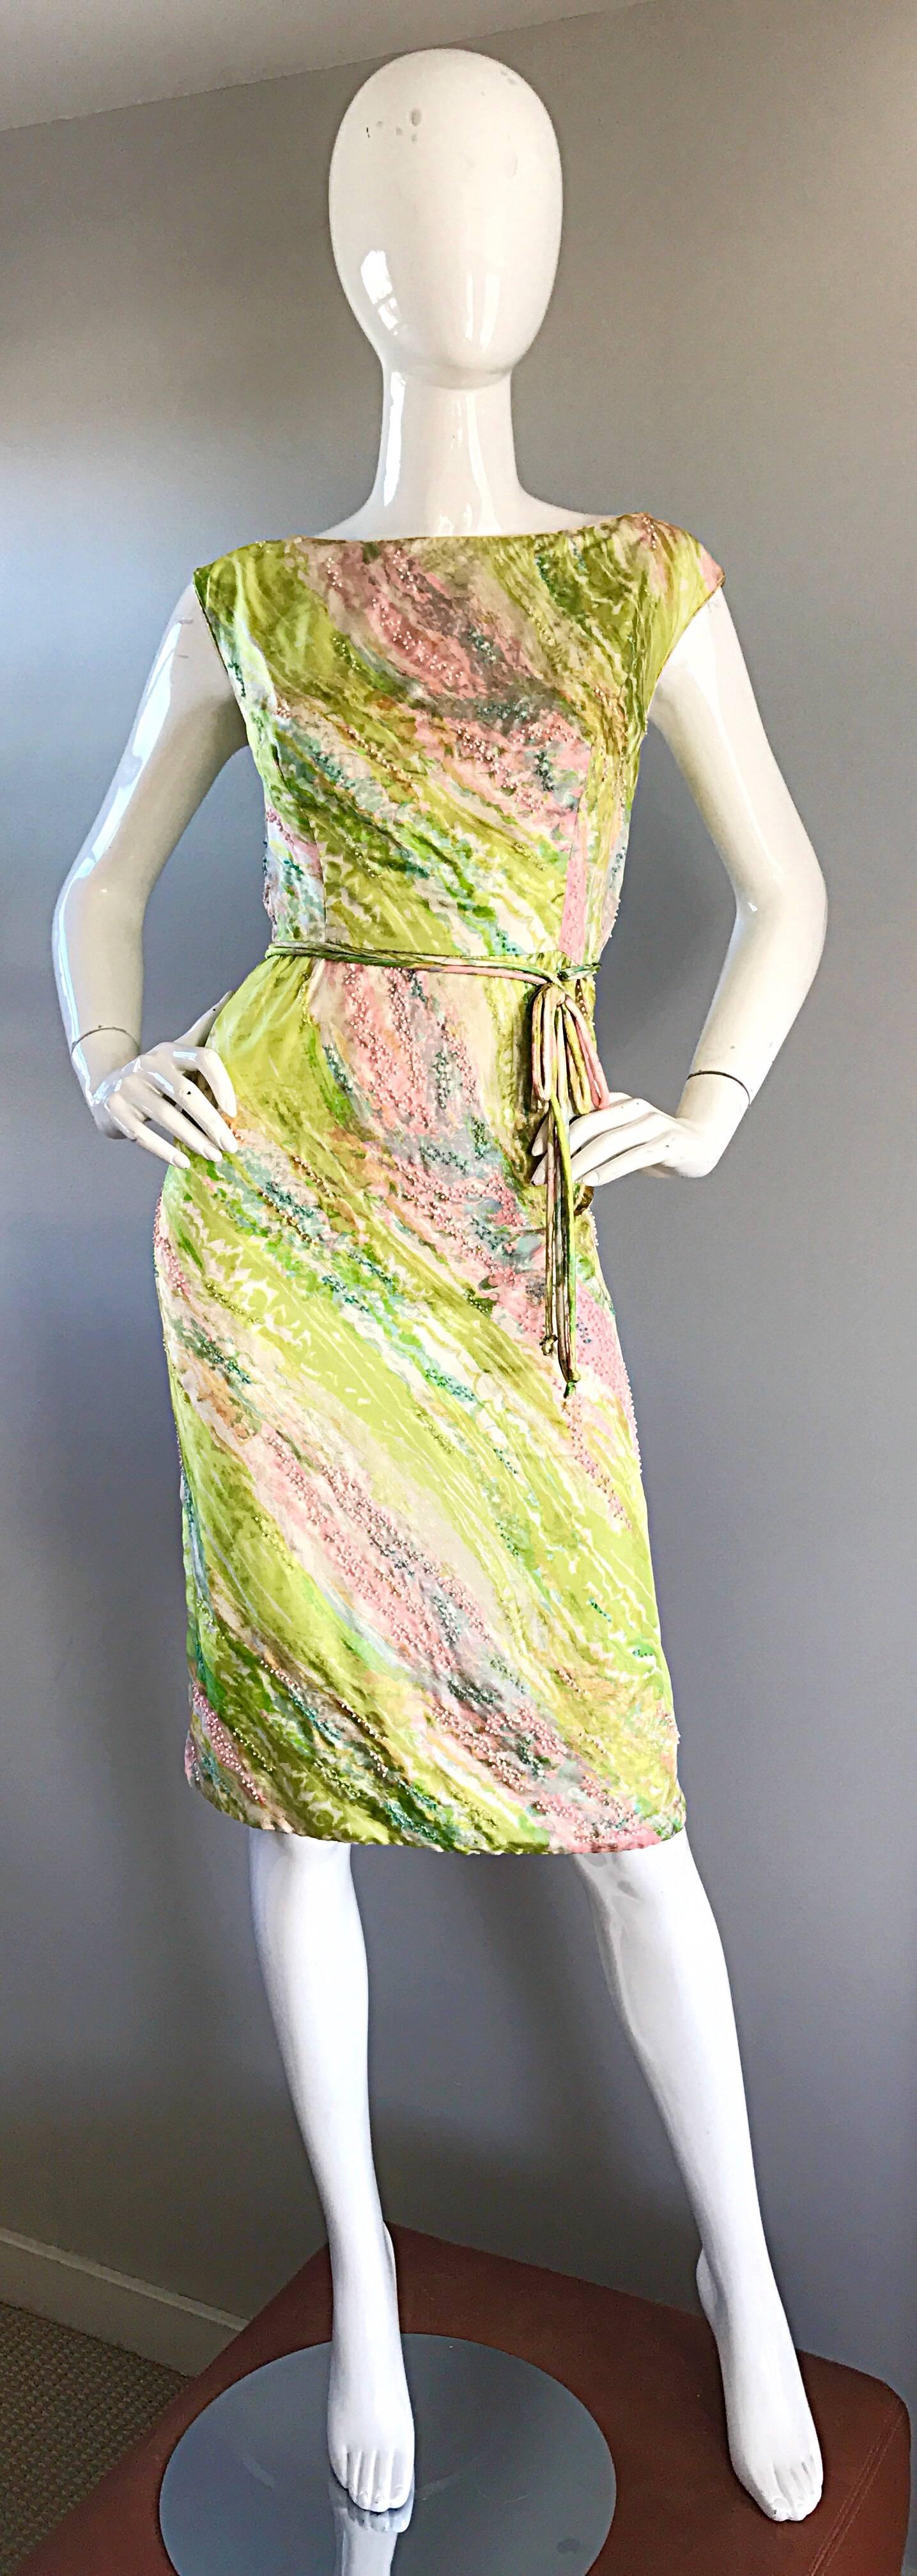 Sensational late 1950s, early 1960s 60s luxurious silk watercolor beaded dress! Features vibrant green, pink, blue and white colors throughout. Thousands of hand-sewn seeds beads throughout. Attached bow self belt at waist. Full metal zipper up the